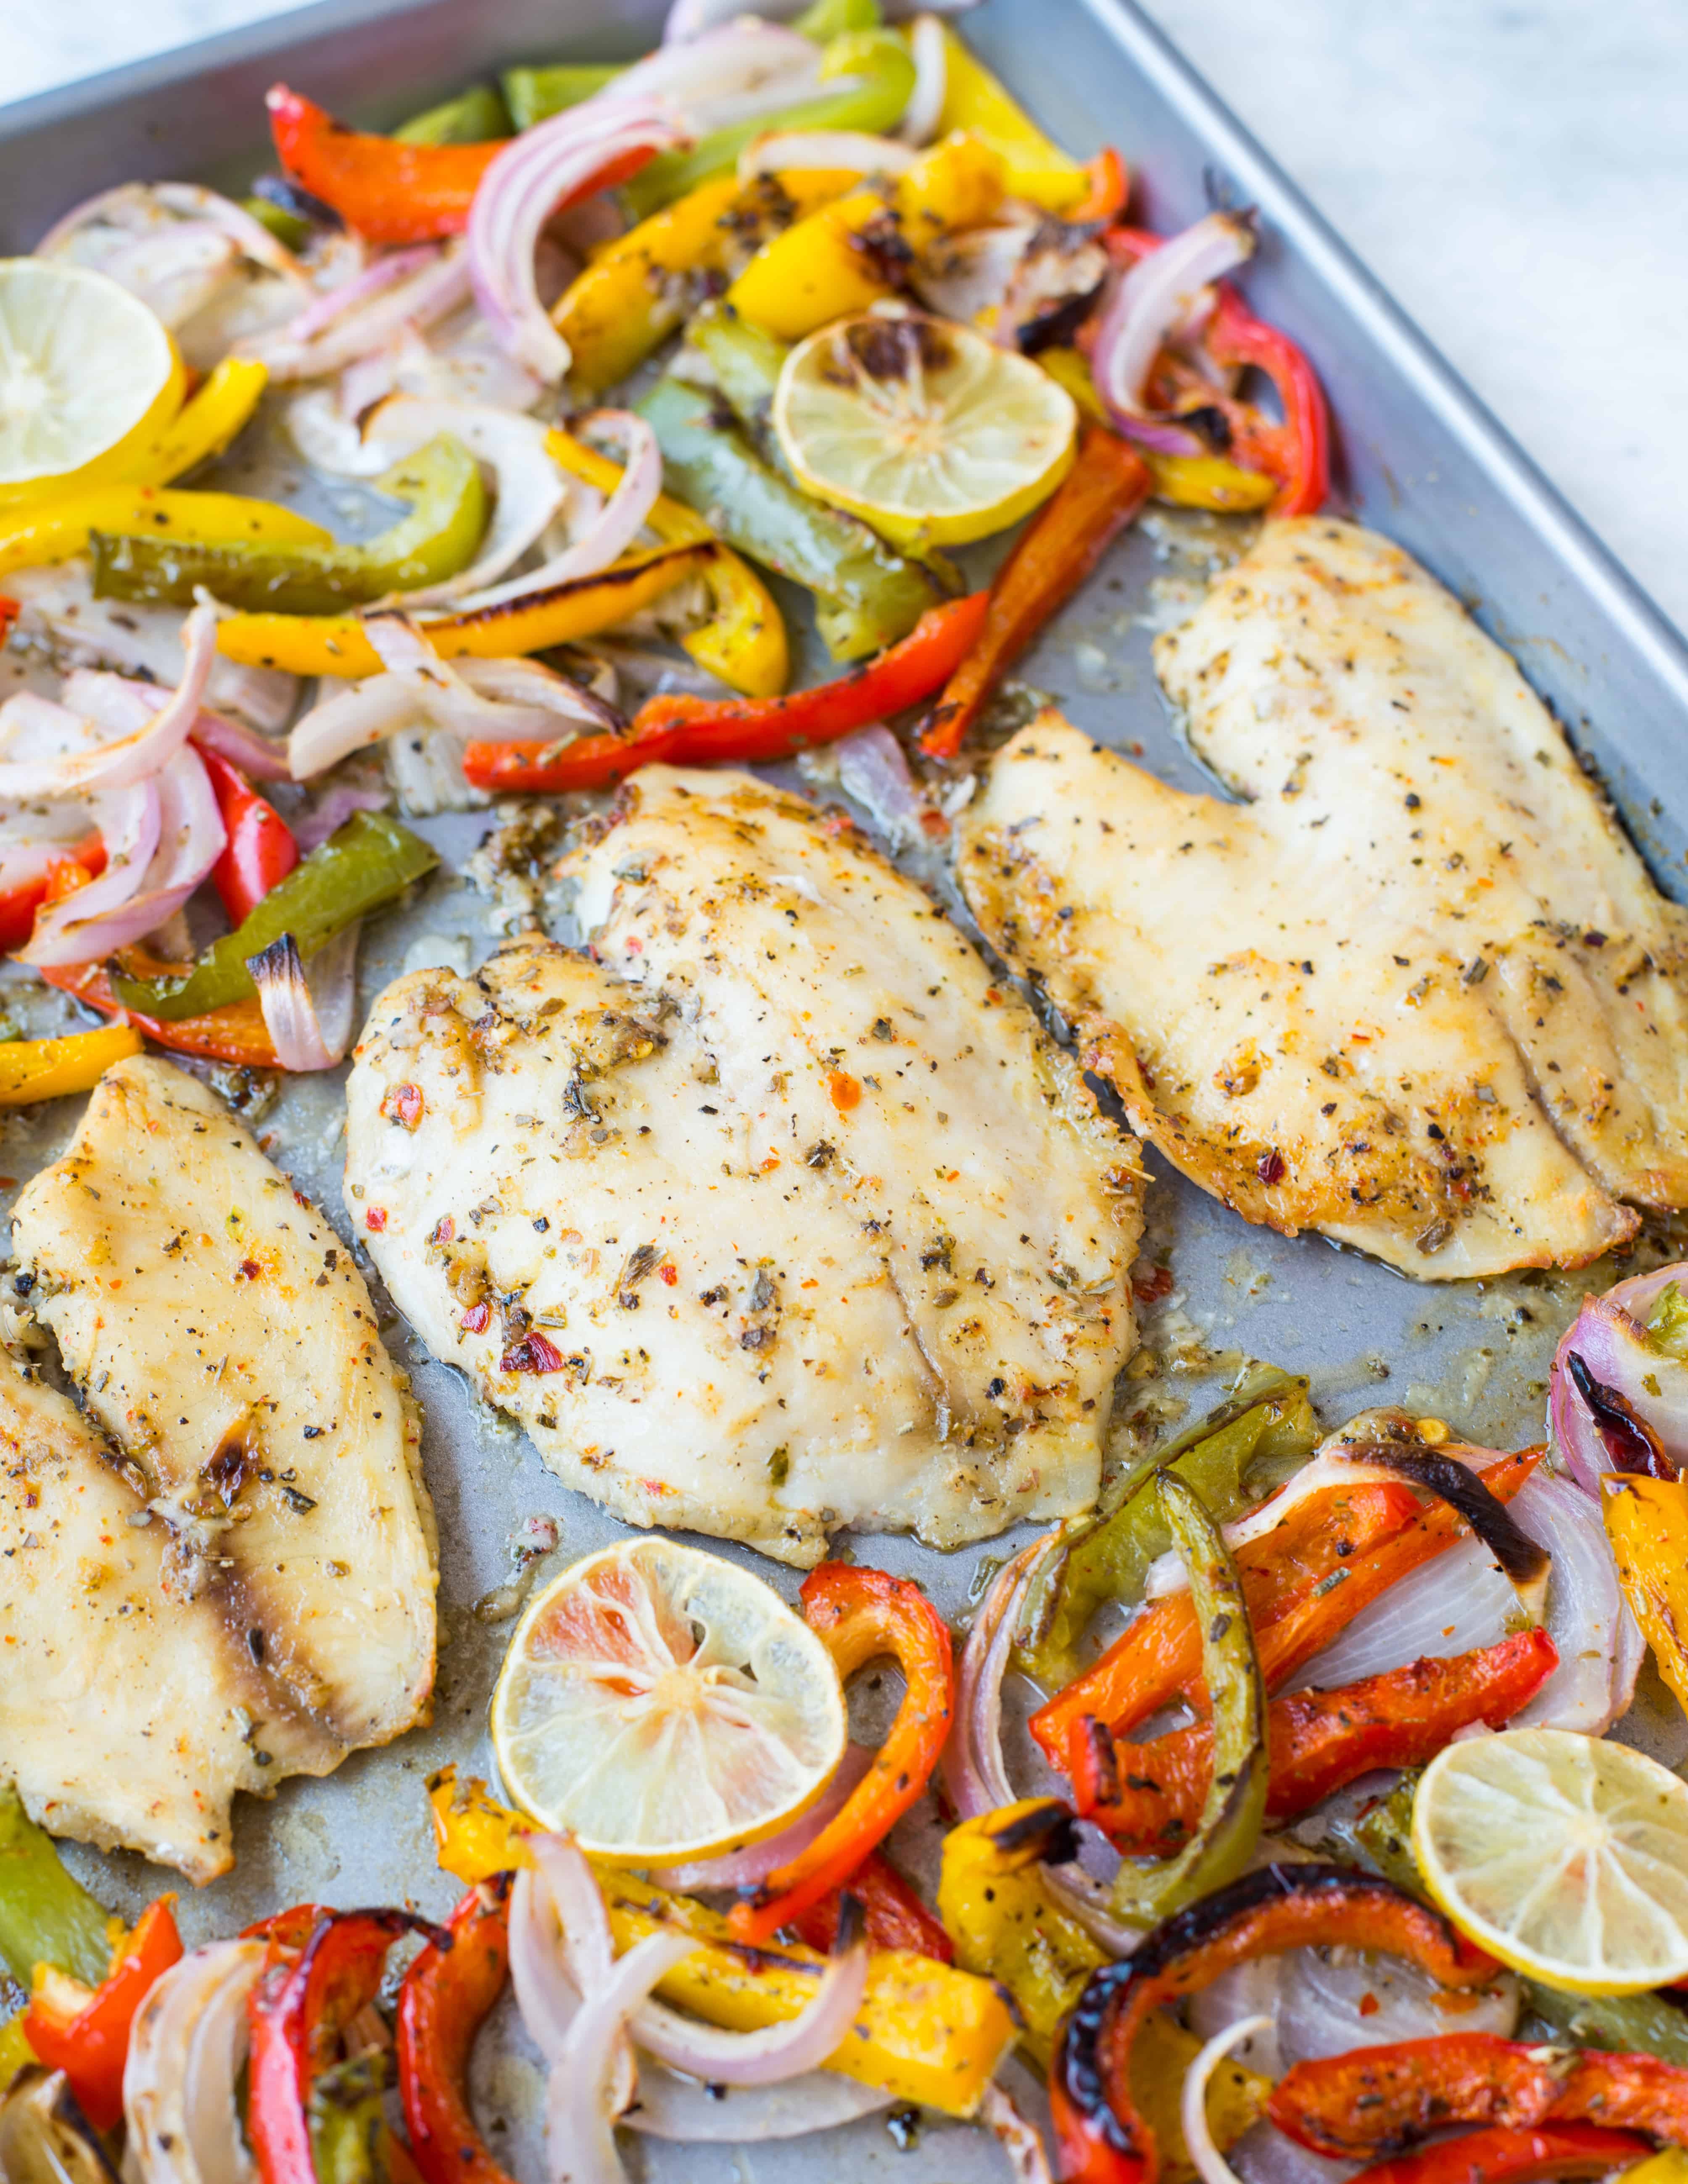 BAKED TILAPIA IN LEMON GARLIC SAUCE | The flavours of kitchen